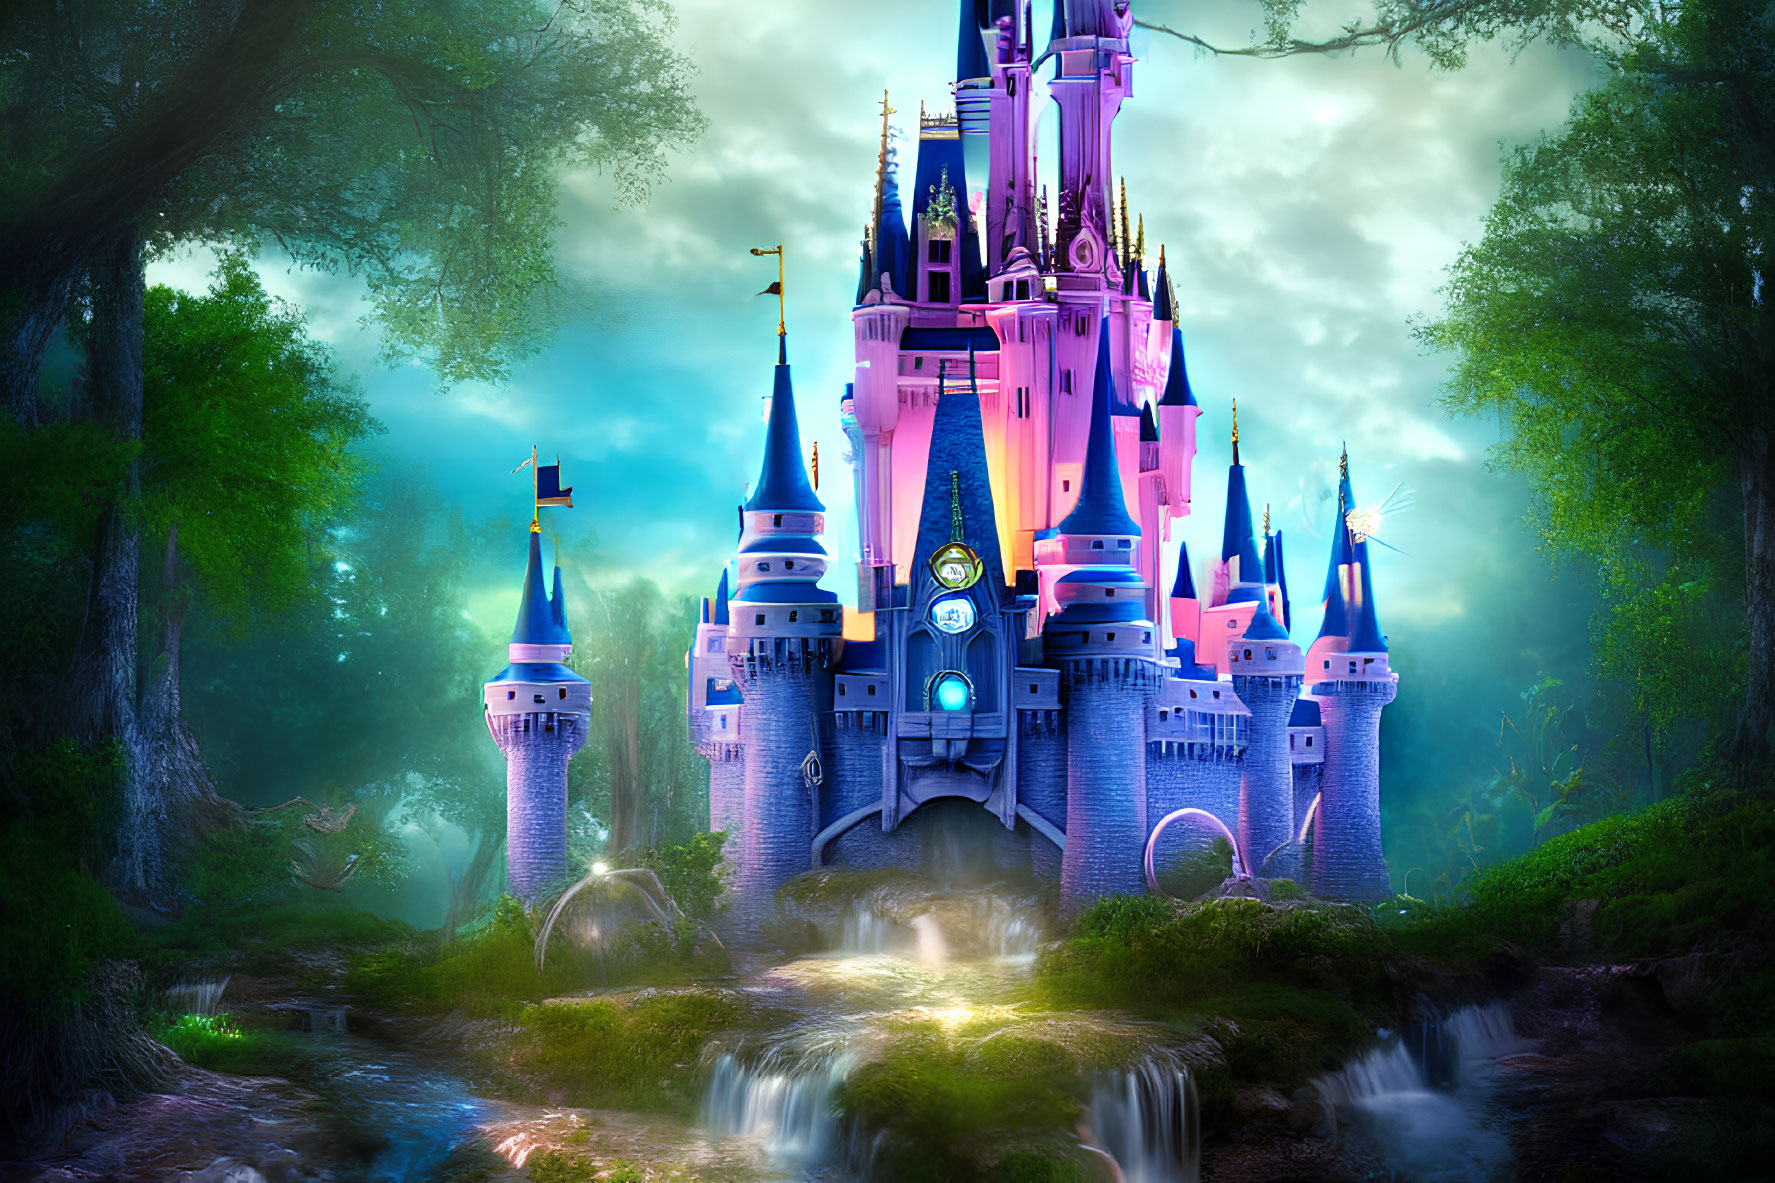 Enchanted forest castle with spires and glowing light